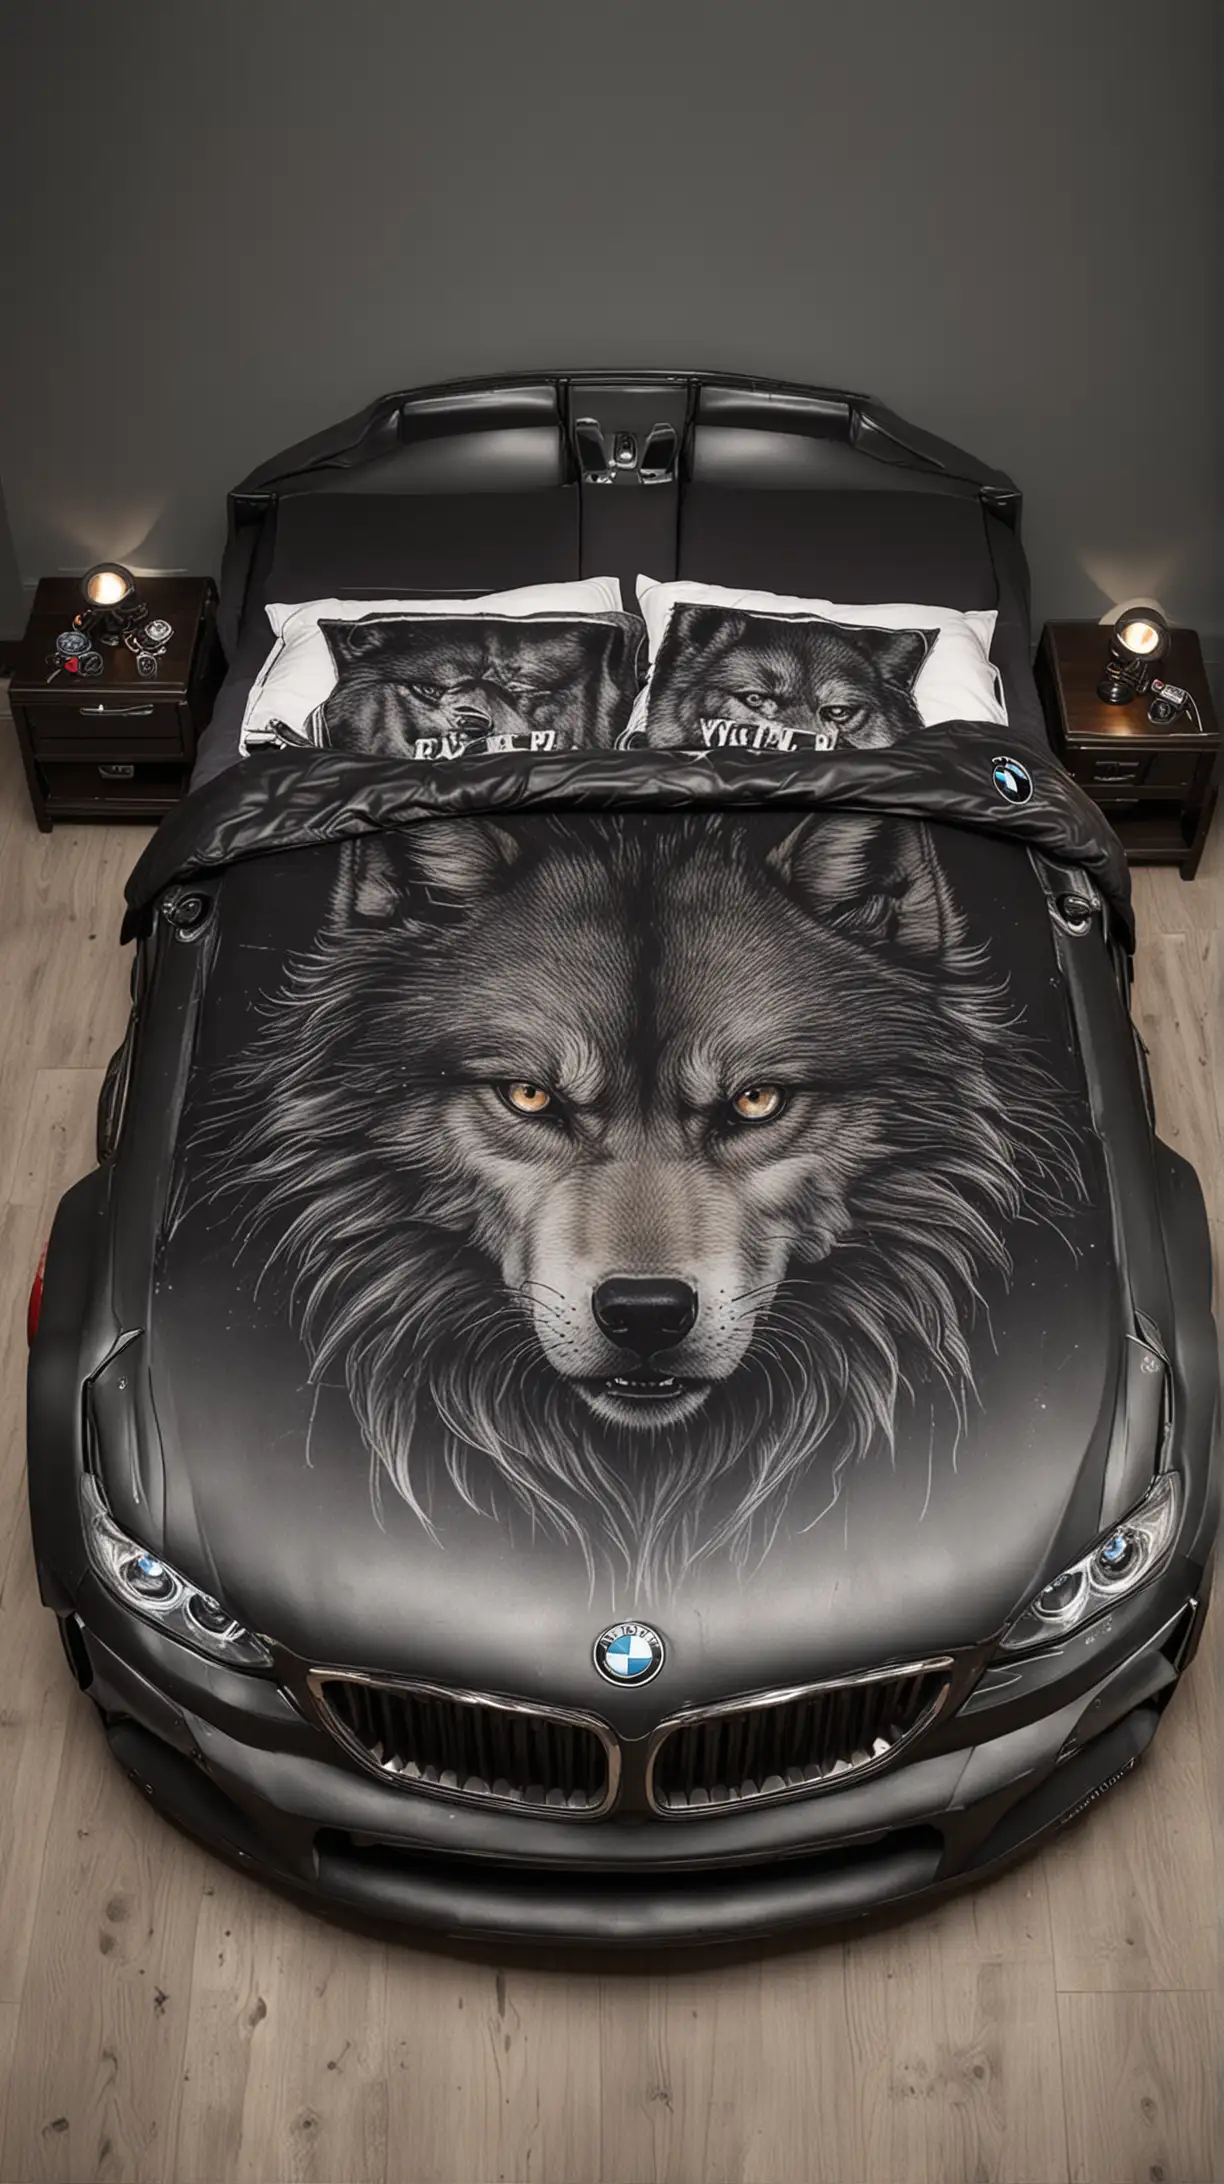 Luxury Bedroom Furniture BMW CarShaped Double Bed with Evil and Good Wolf Graphics